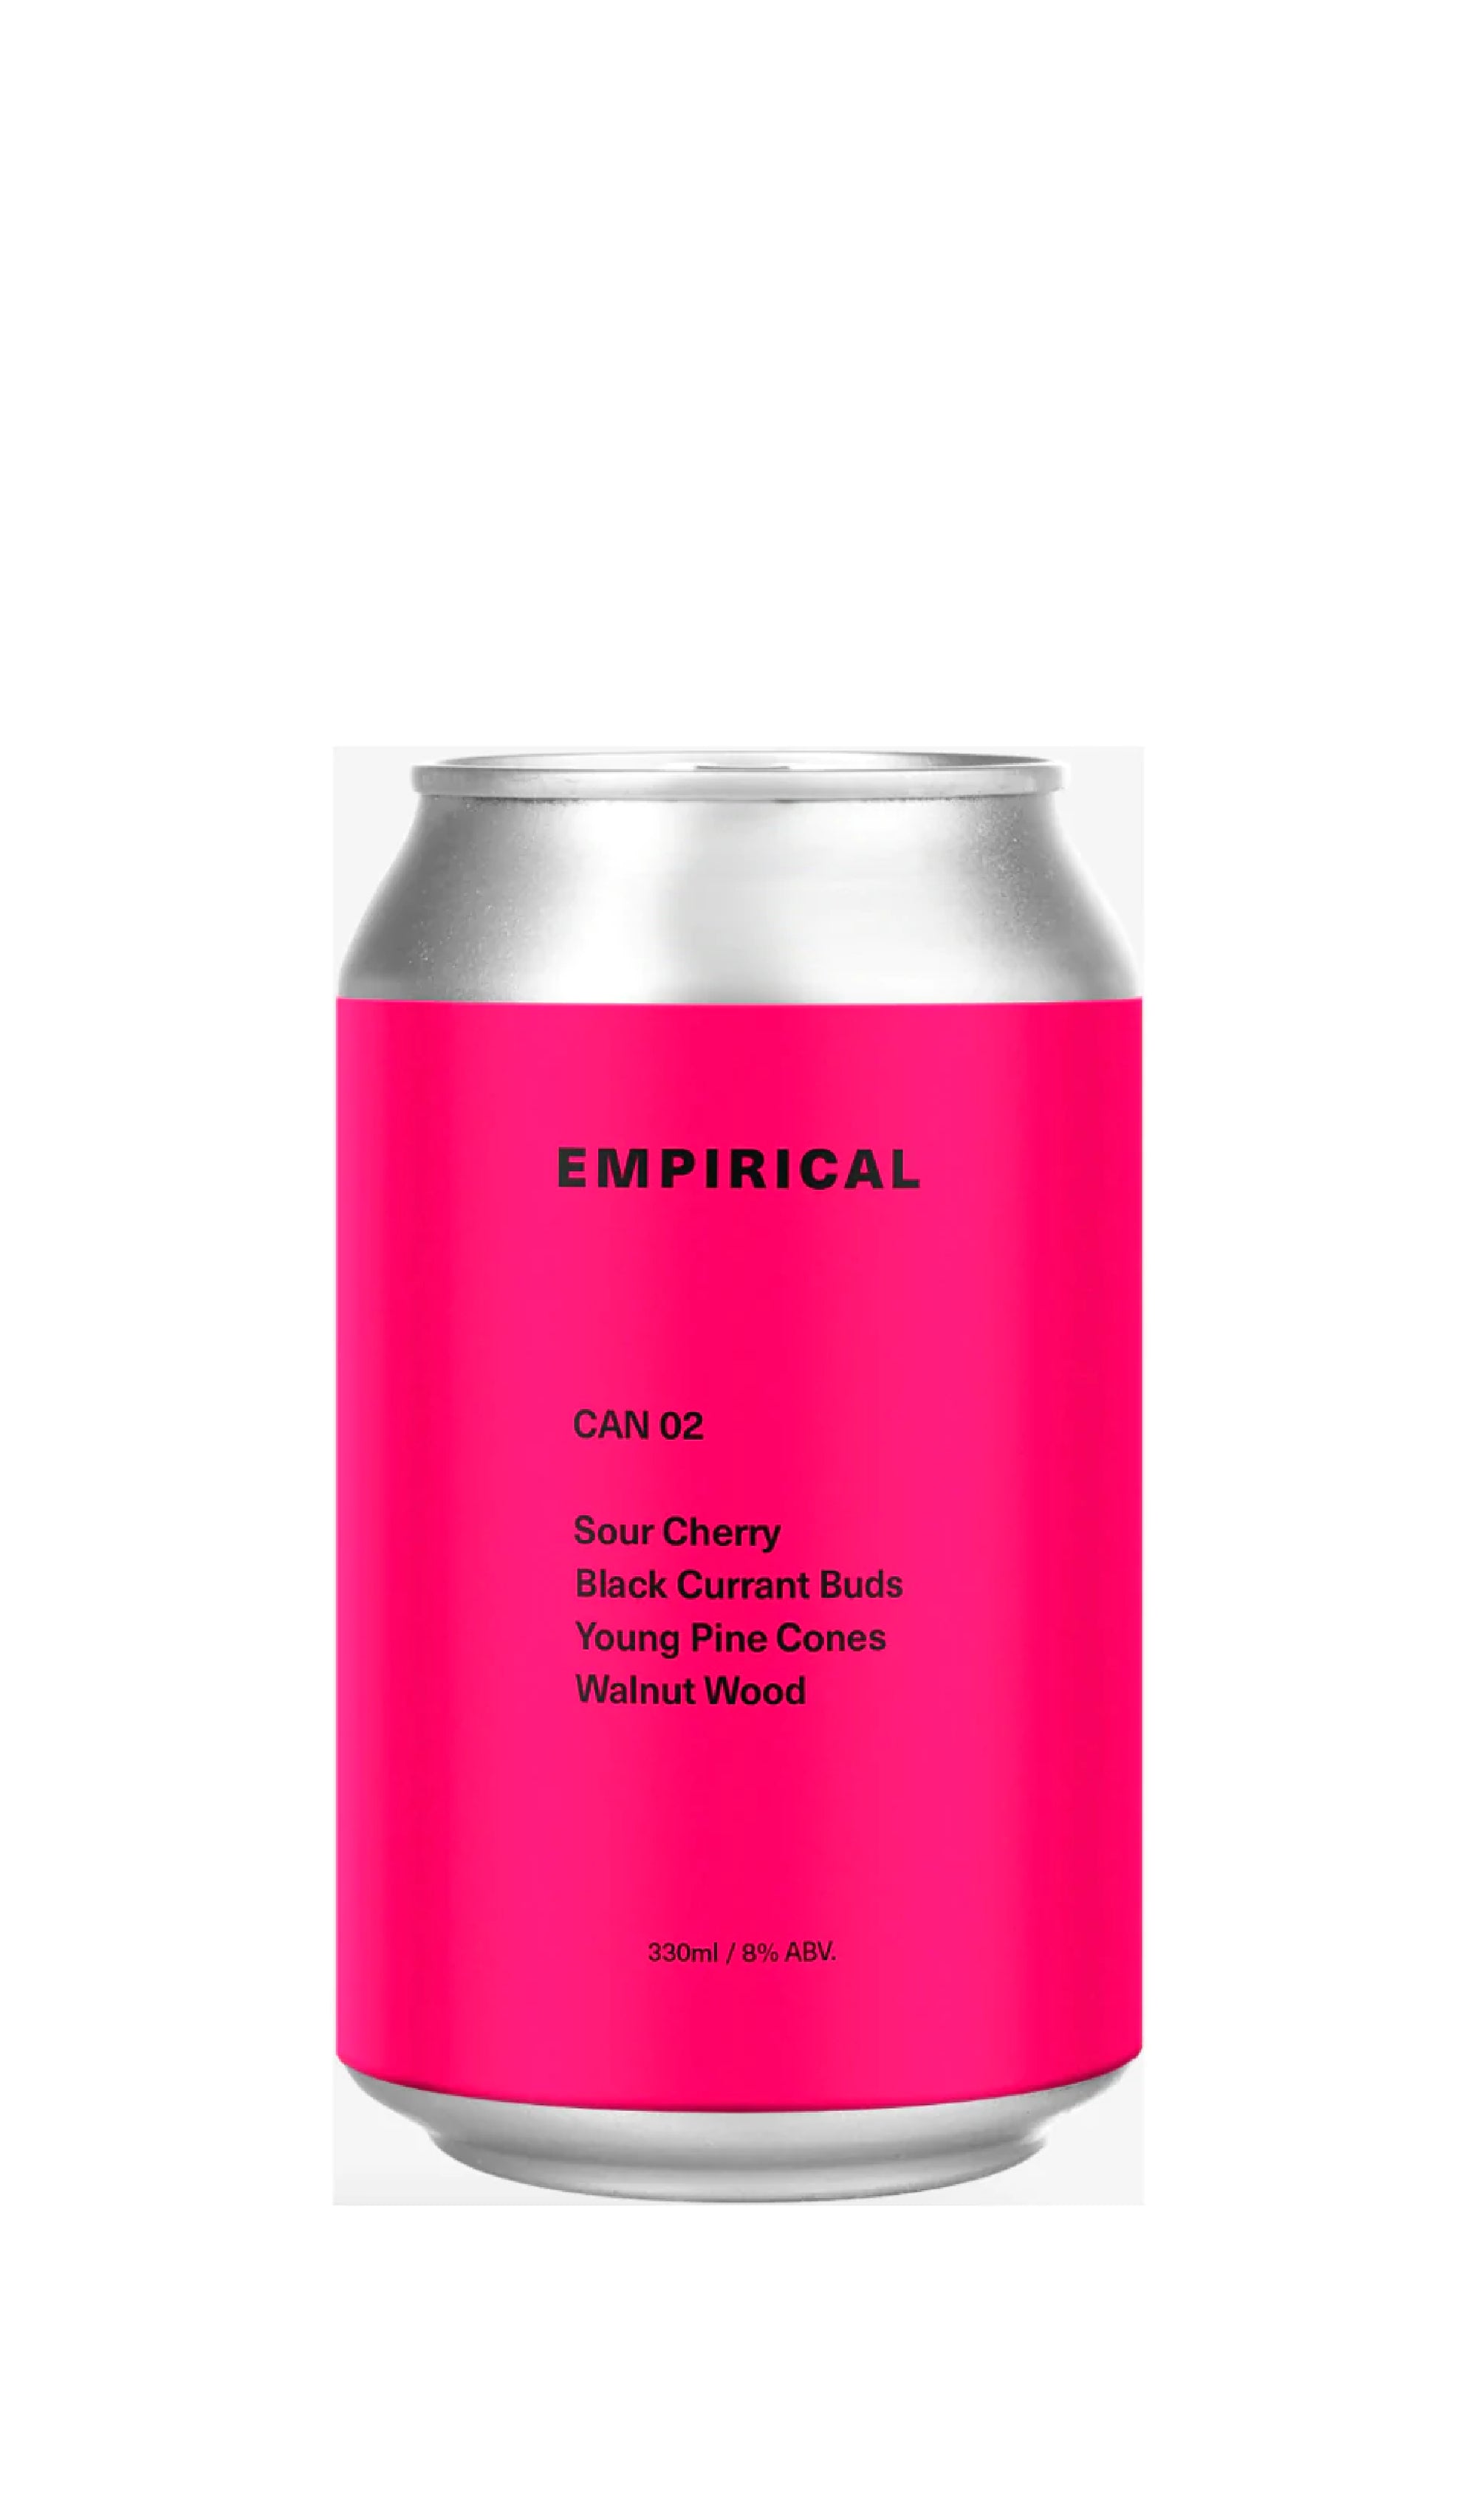 Empirical - "CAN 02" Sour Cherry/Black Currant Buds/Young Pine Cones (355ml)